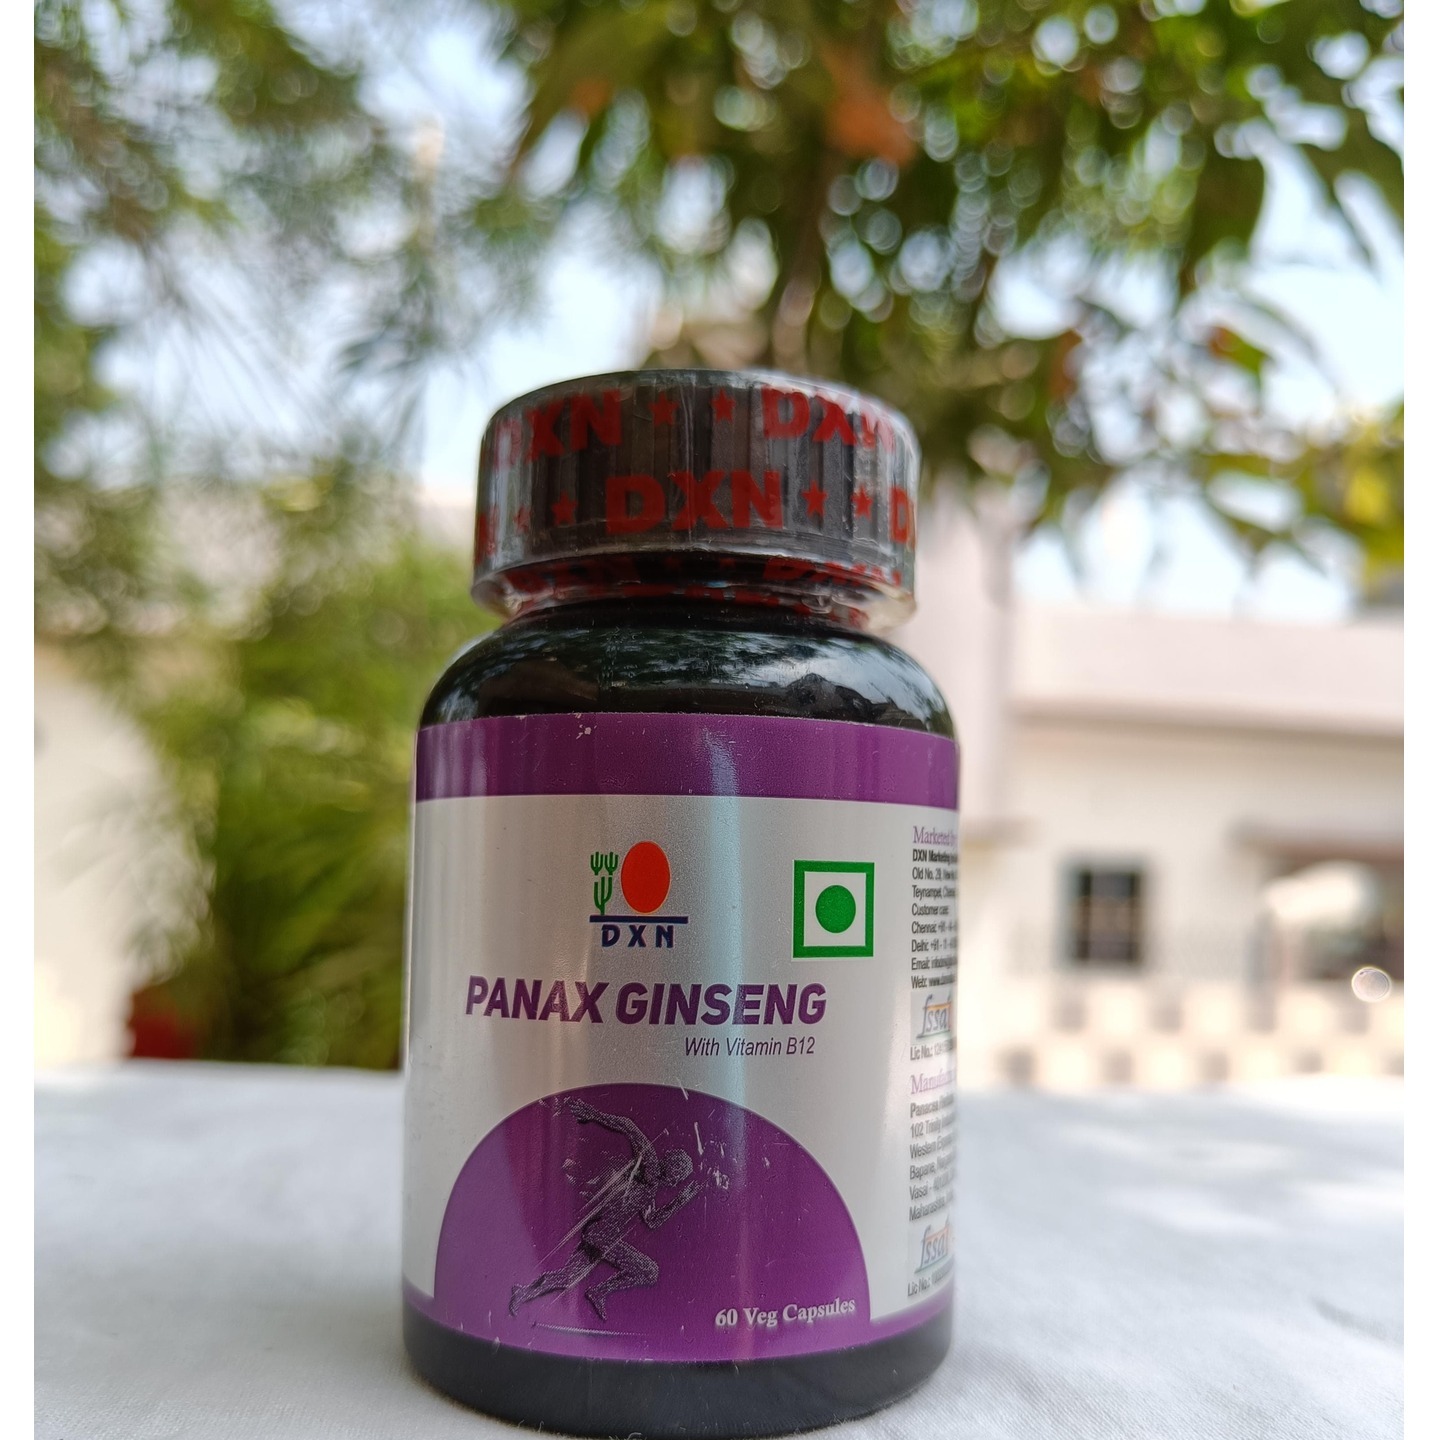 DXN Panax Ginseng-60 capsules